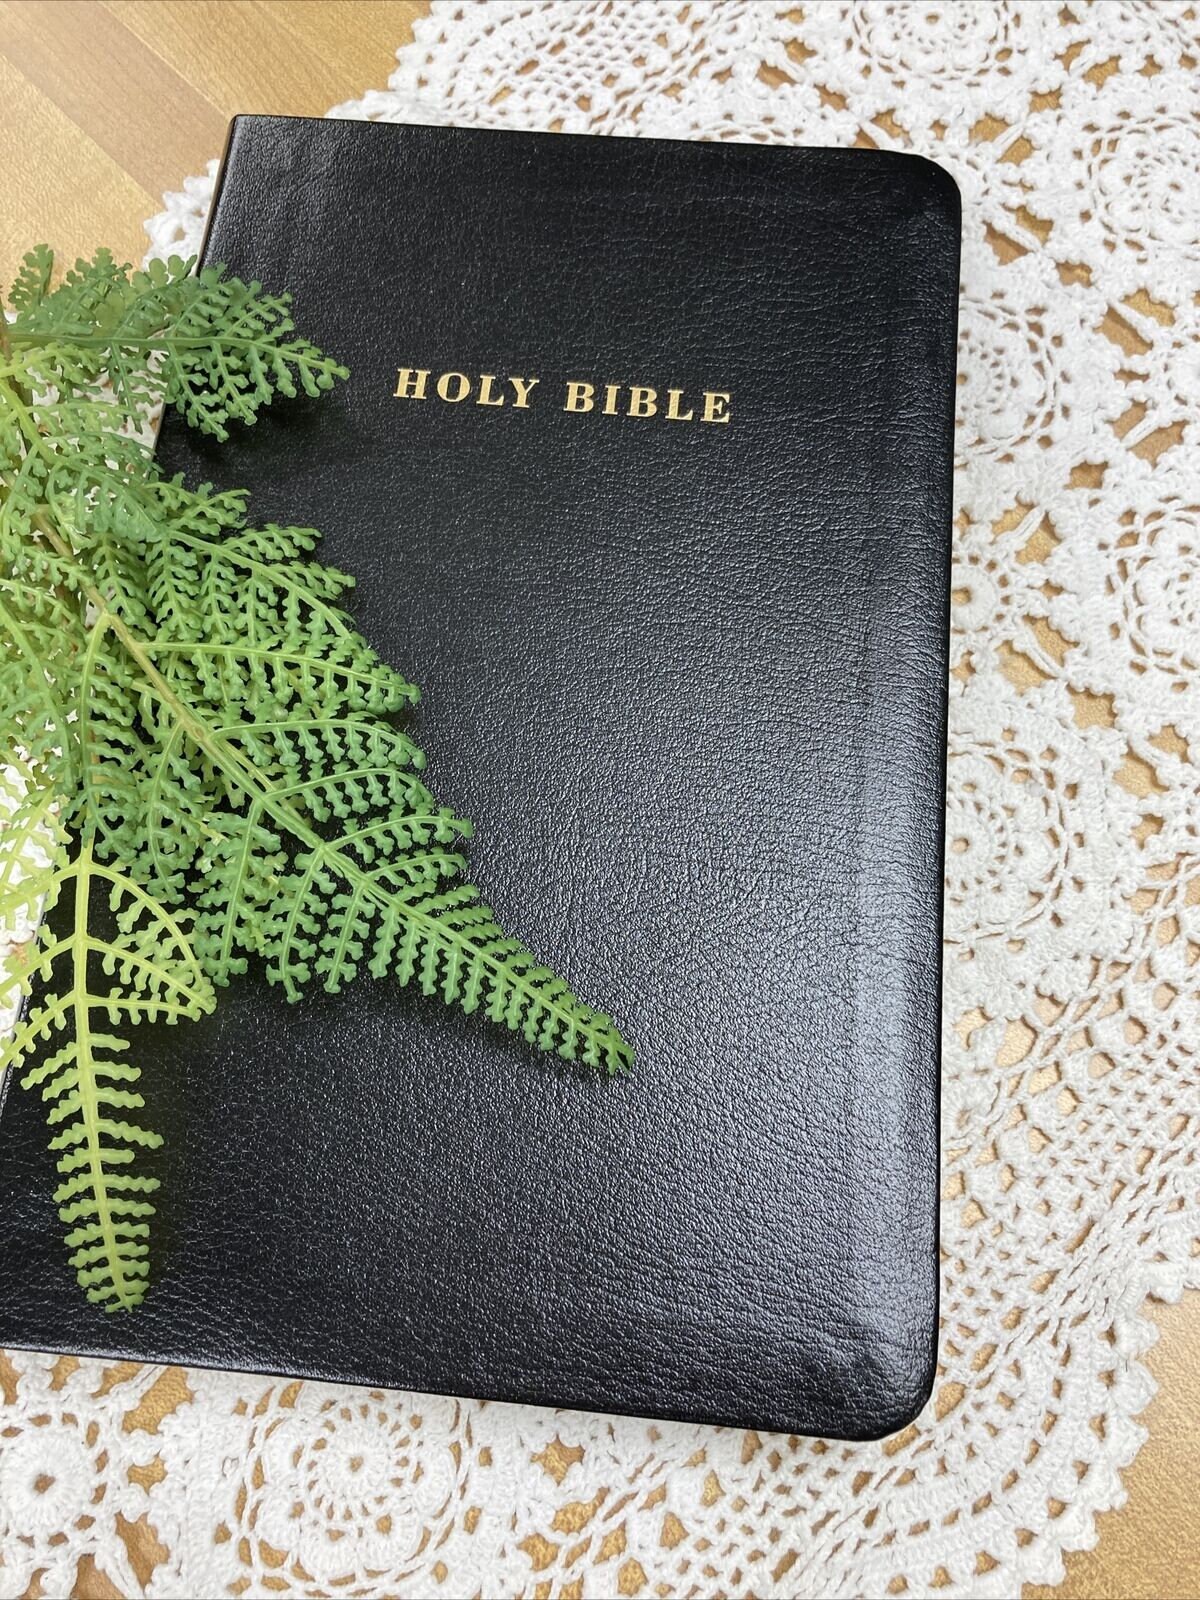 Printable Bible Reading Tracker Pages for Planners and Journals Fits A5 and  Half US Letter. Plants and Stained Glass Themed. 